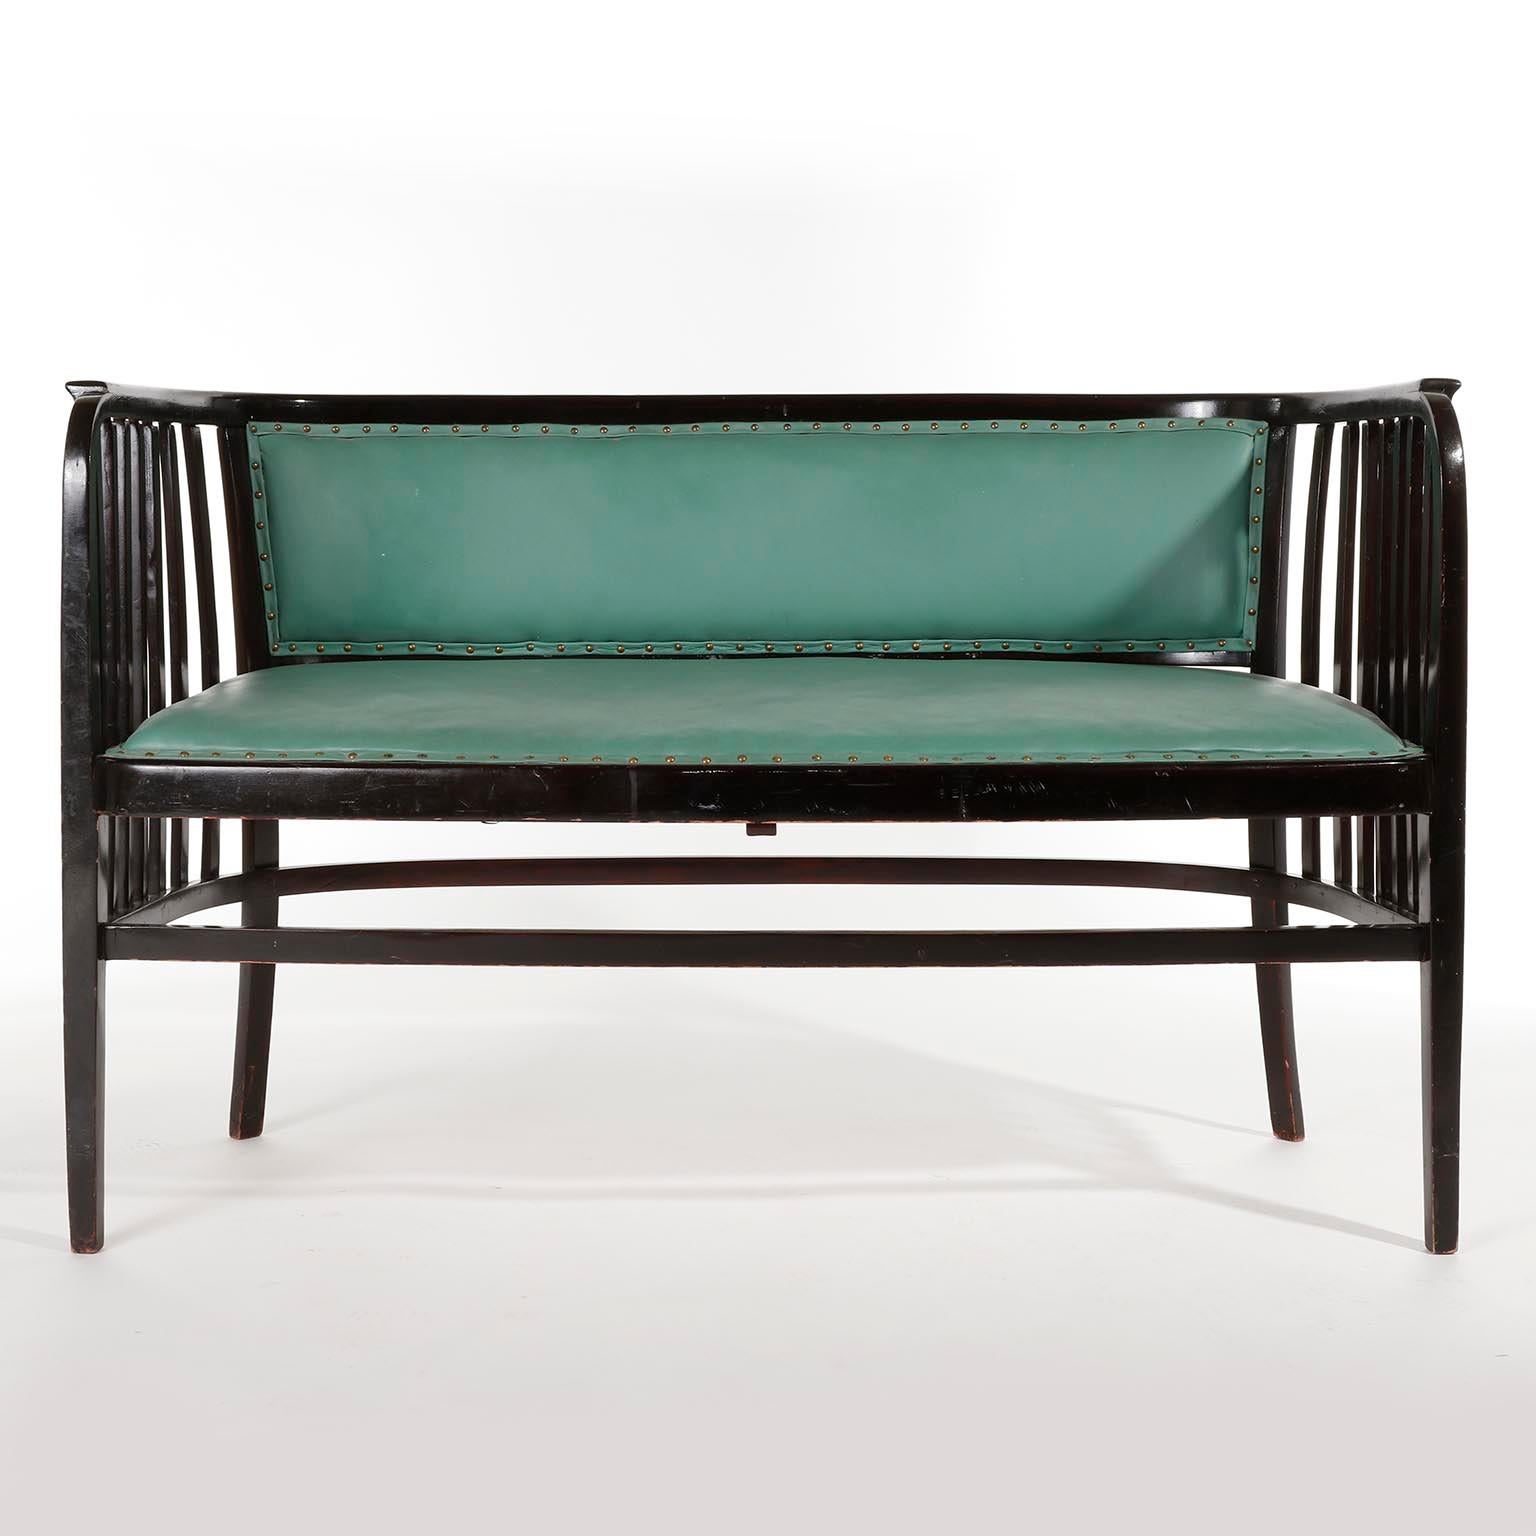 Vienna Secession Marcel Kammerer Settee Bench Seat, Thonet Austria, Turquoise Green Leather, 1910 For Sale